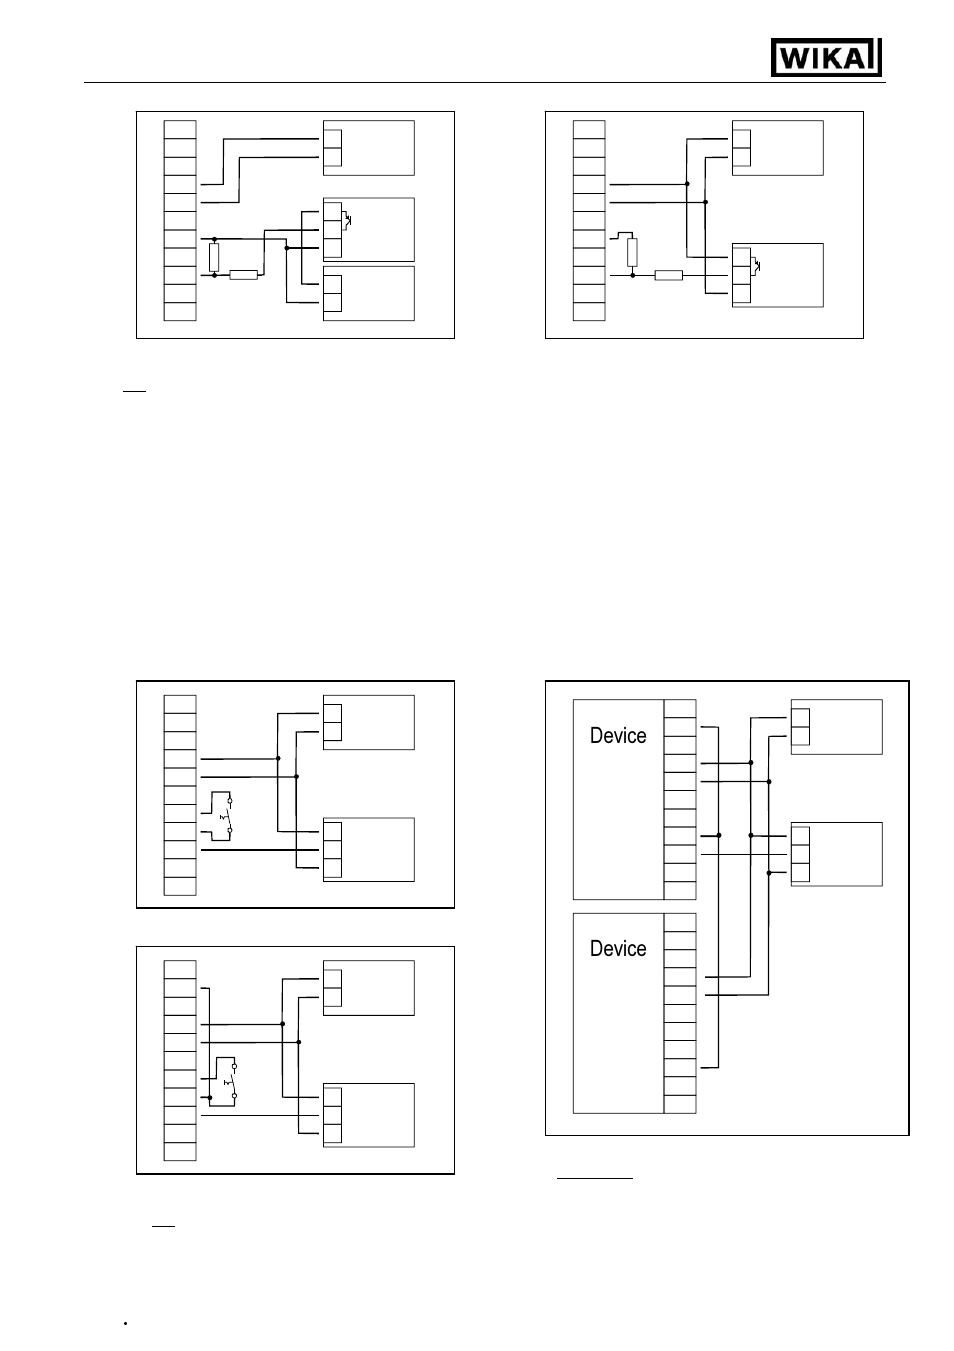 Device no.1, Device no.2, Operating instructions digital indicator di15 | Connecting a counter signal | WIKA DI15 User Manual | Page 8 / 28